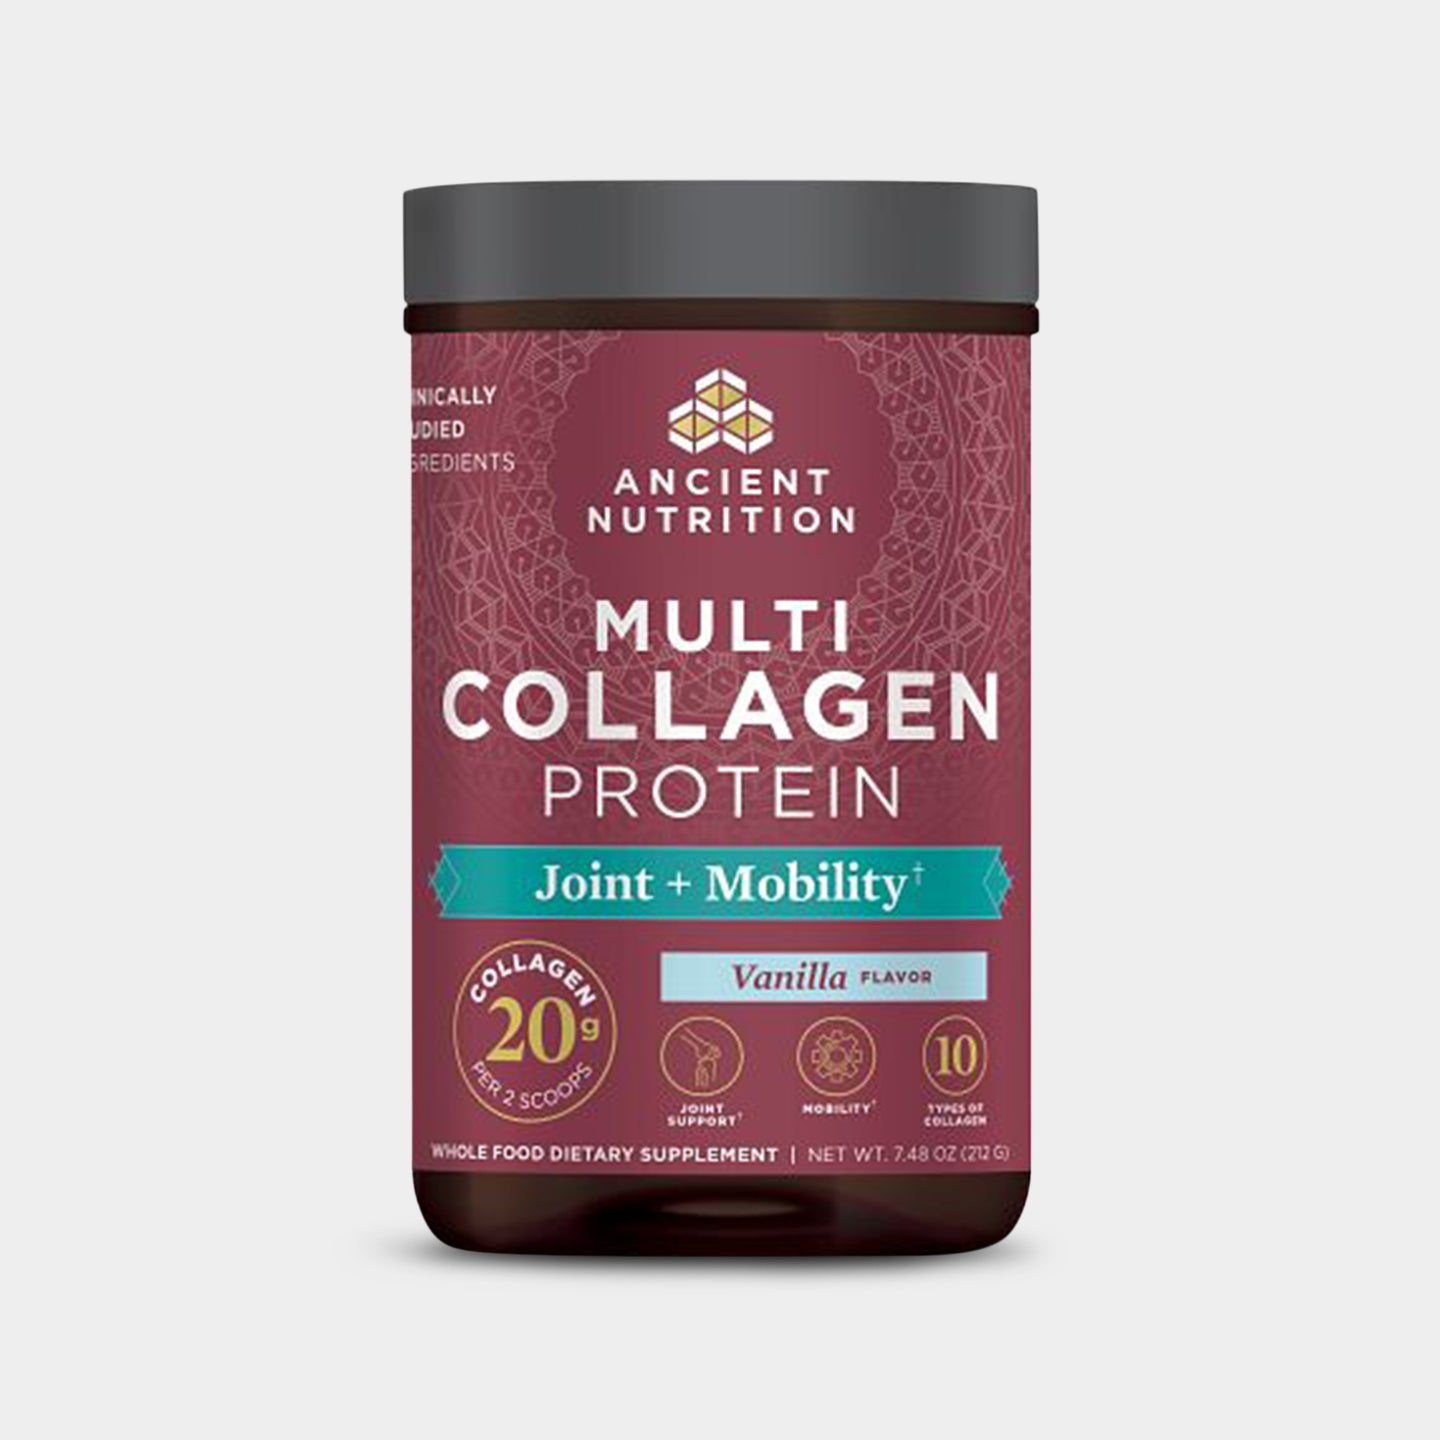 Ancient Nutrition Multi Collagen Protein - Joint + Mobility A1